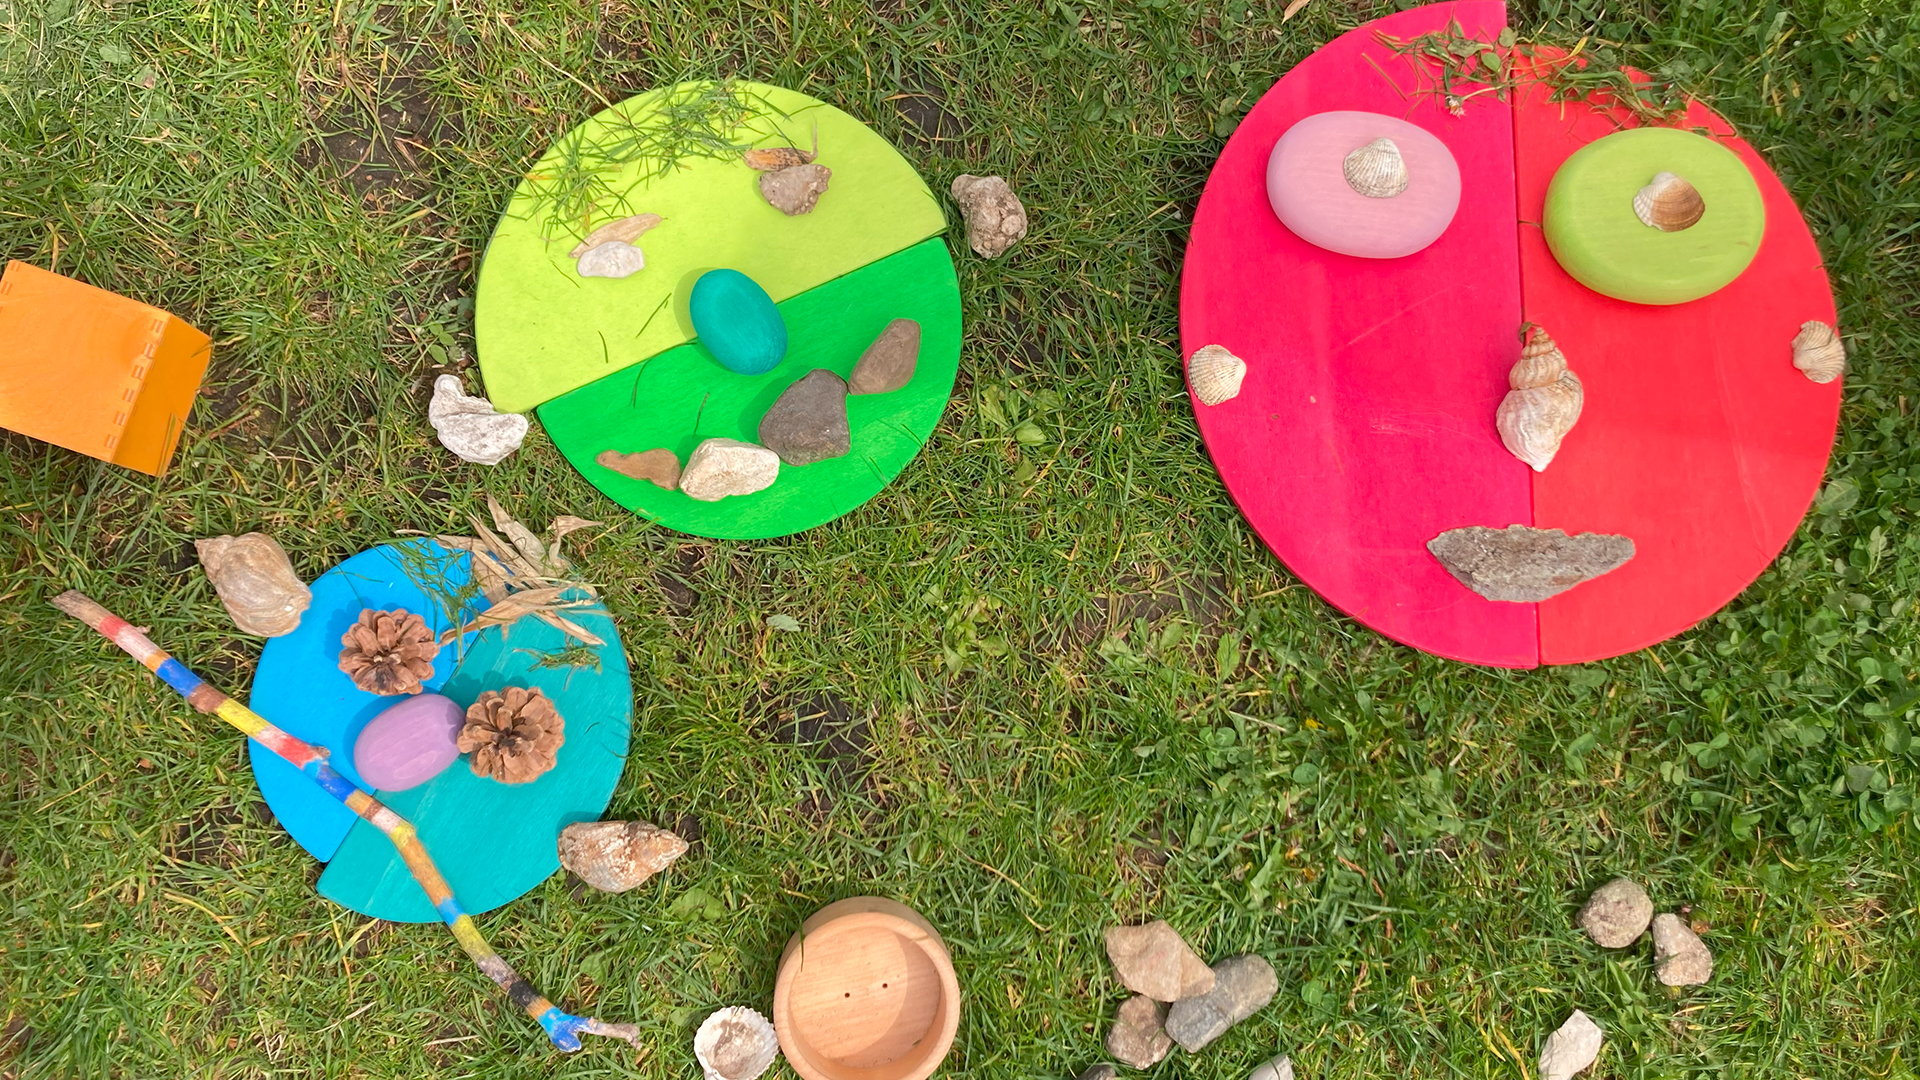 Funny faces made of wooden toys and natural materials lie on the meadow.